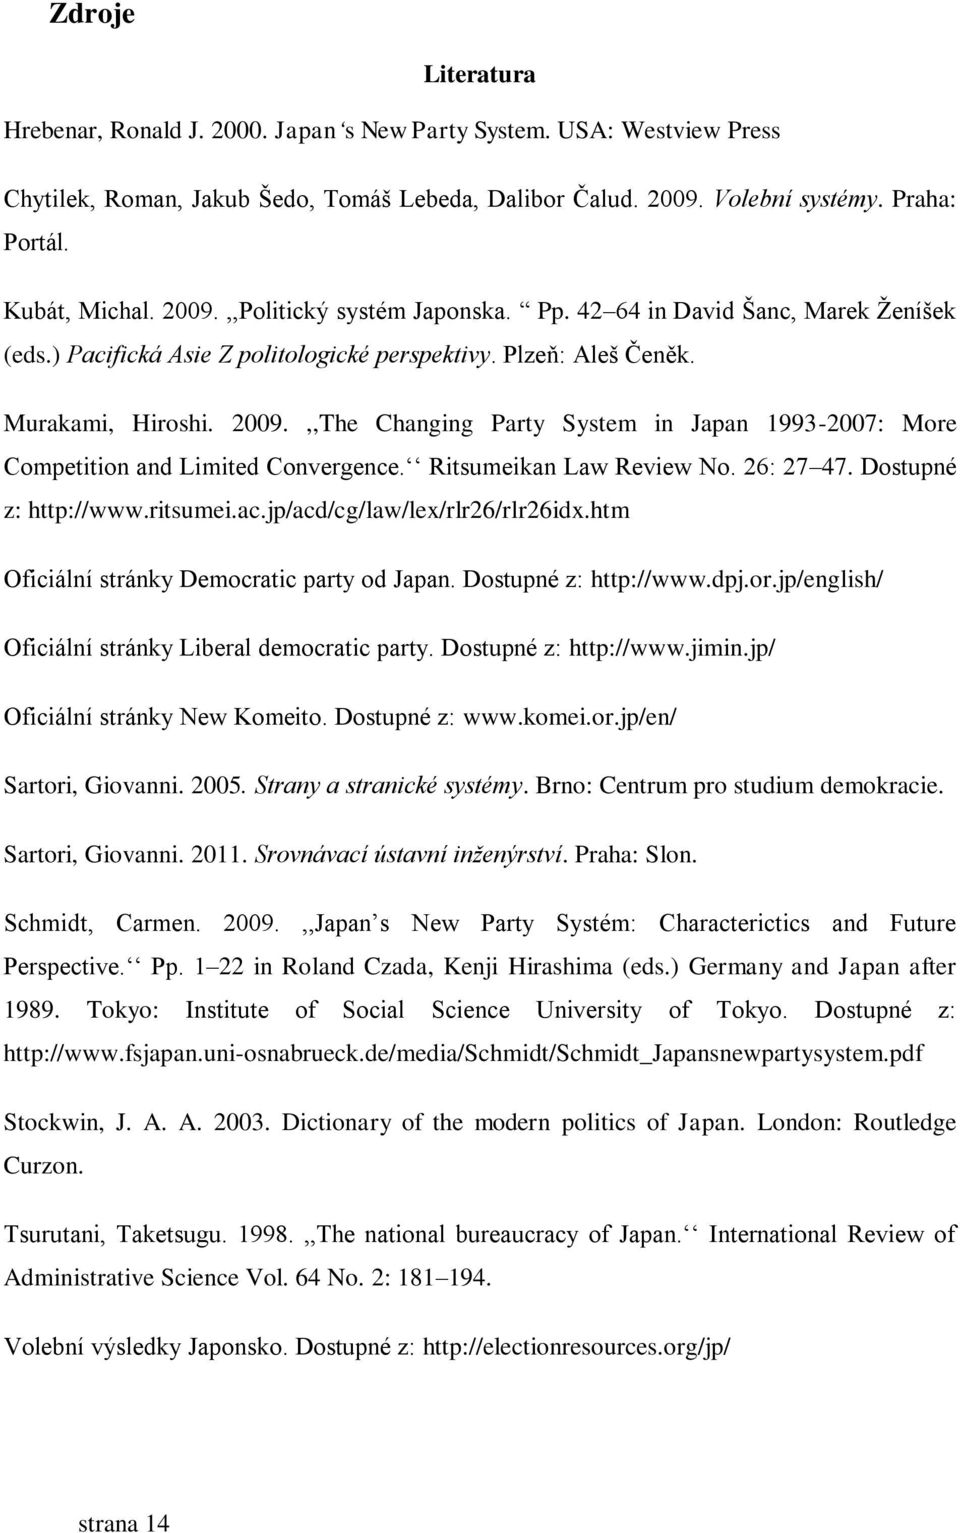 ,,The Changing Party System in Japan 1993-2007: More Competition and Limited Convergence. Ritsumeikan Law Review No. 26: 27 47. Dostupné z: http://www.ritsumei.ac.jp/acd/cg/law/lex/rlr26/rlr26idx.